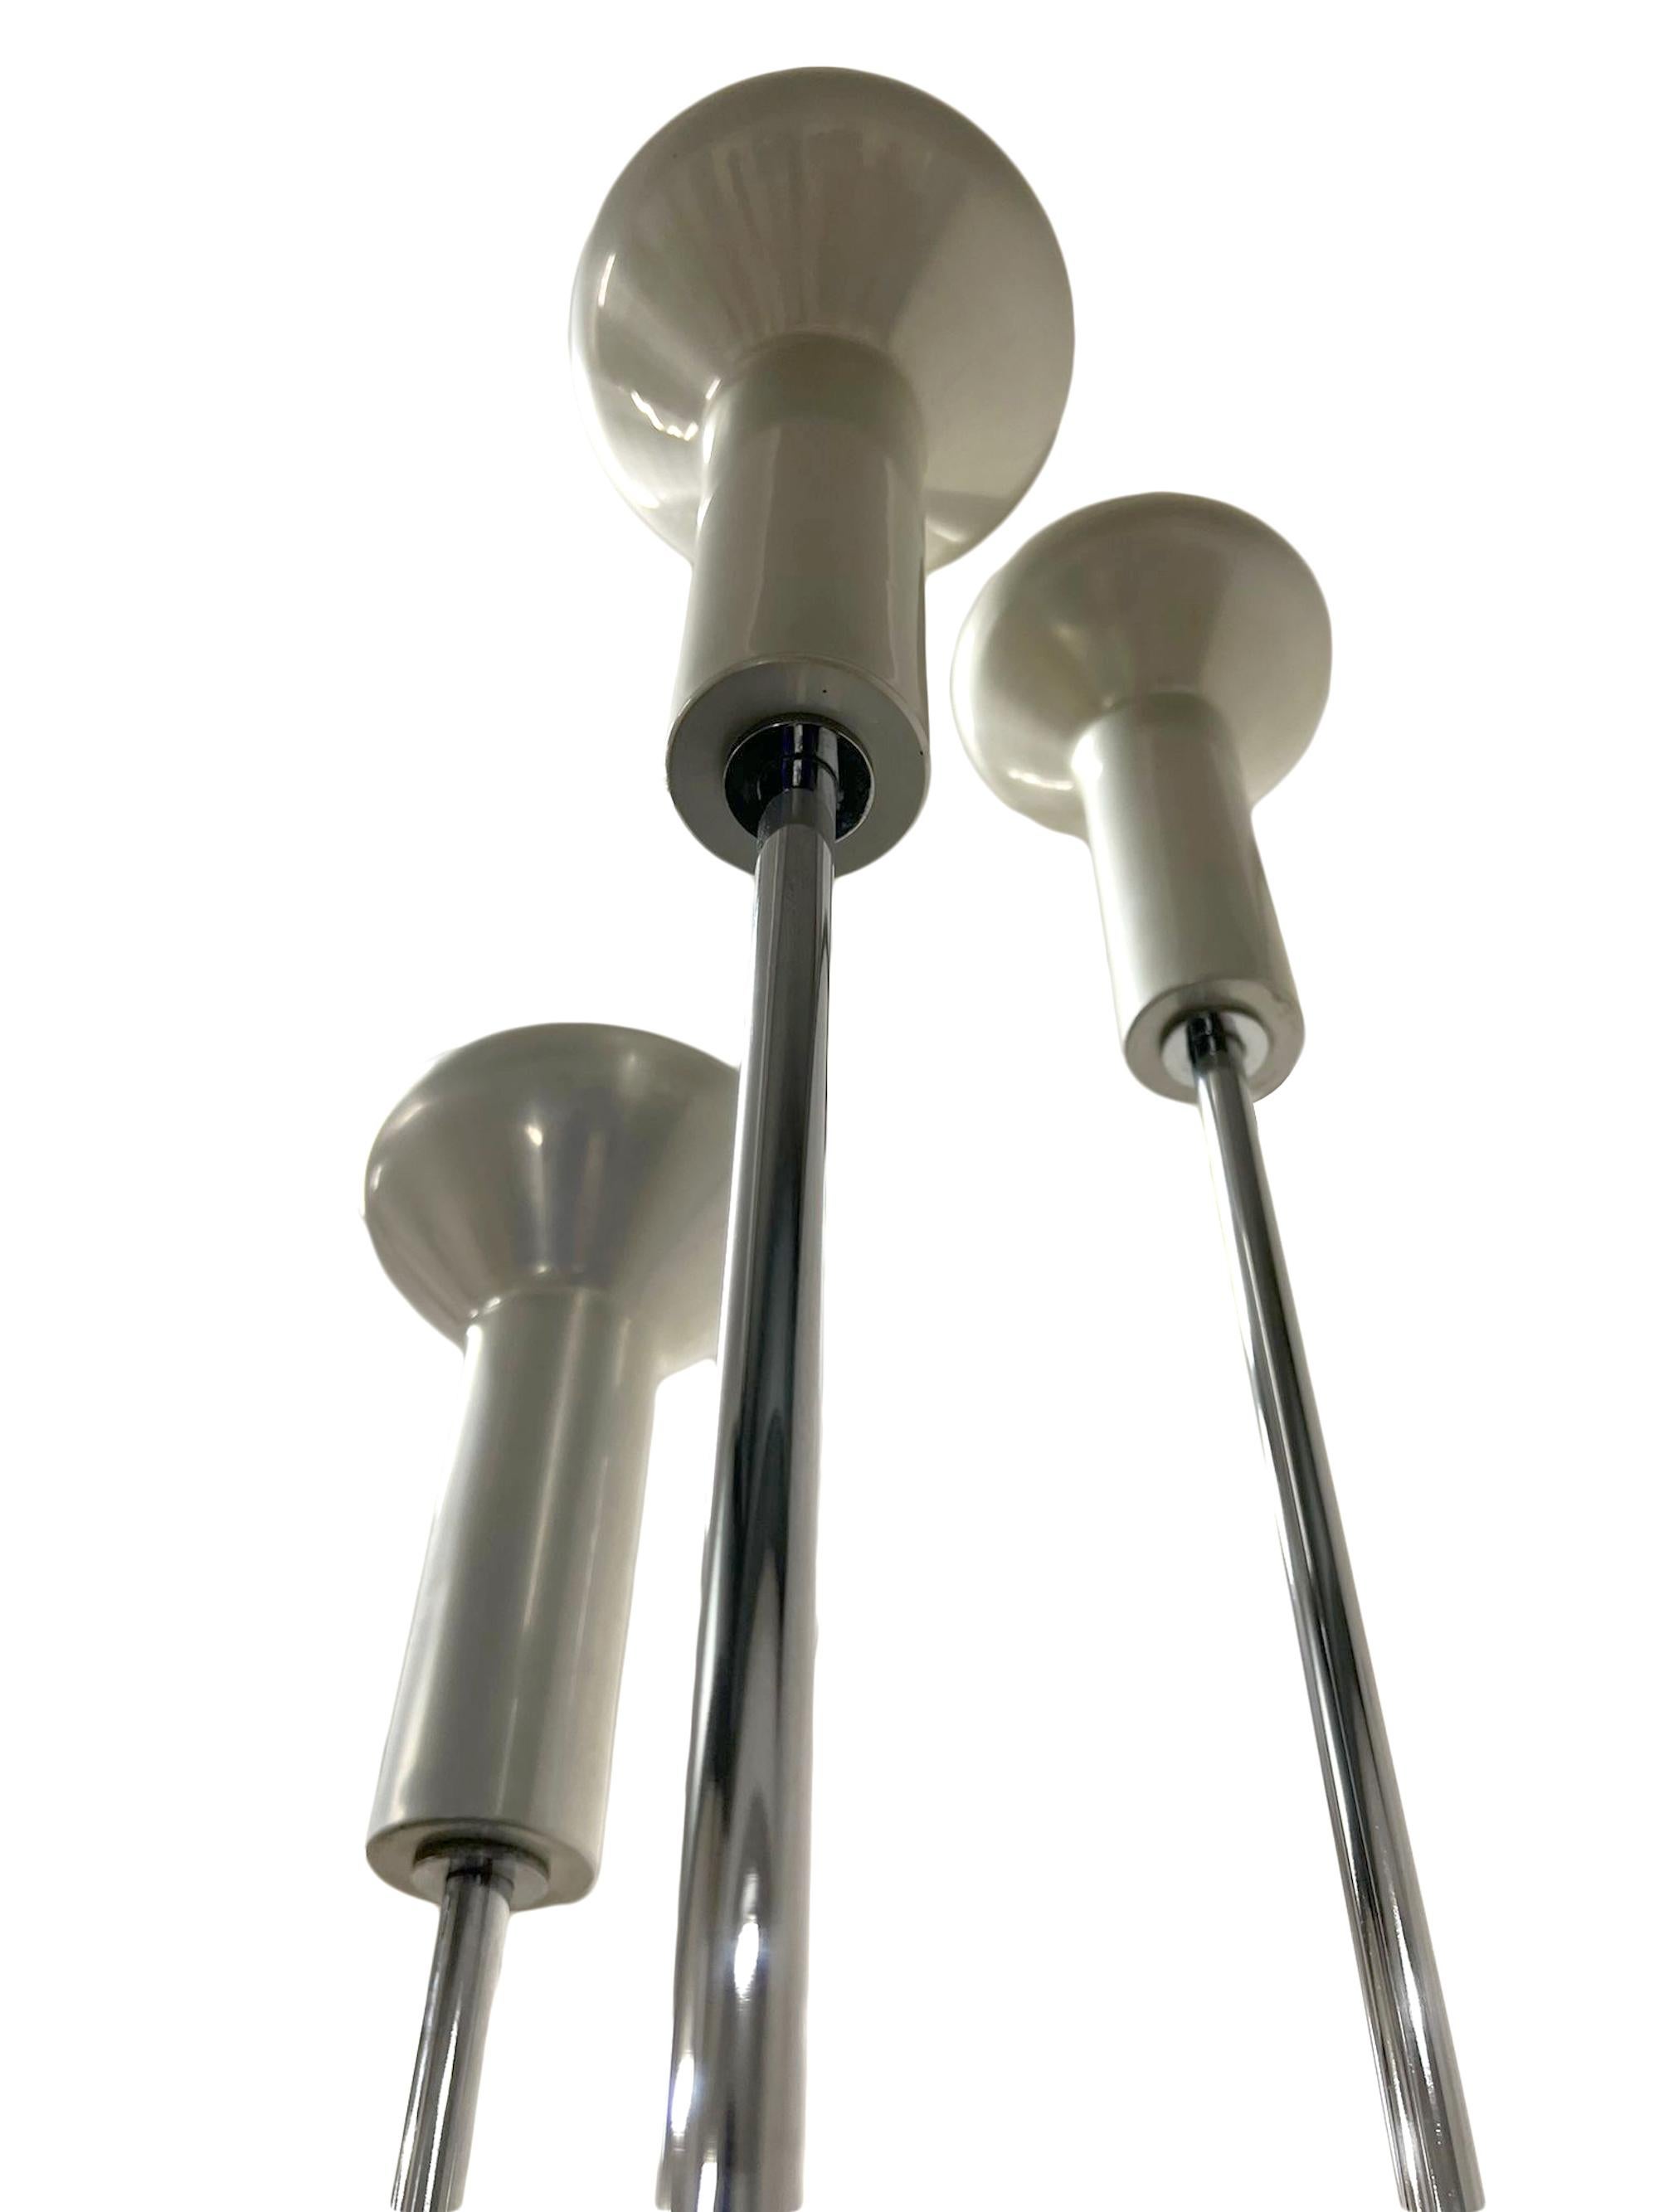 Three Floor Lamps Model 1073/3 by Gino Sarfatti for Arteluce, Italy, 1956 For Sale 5